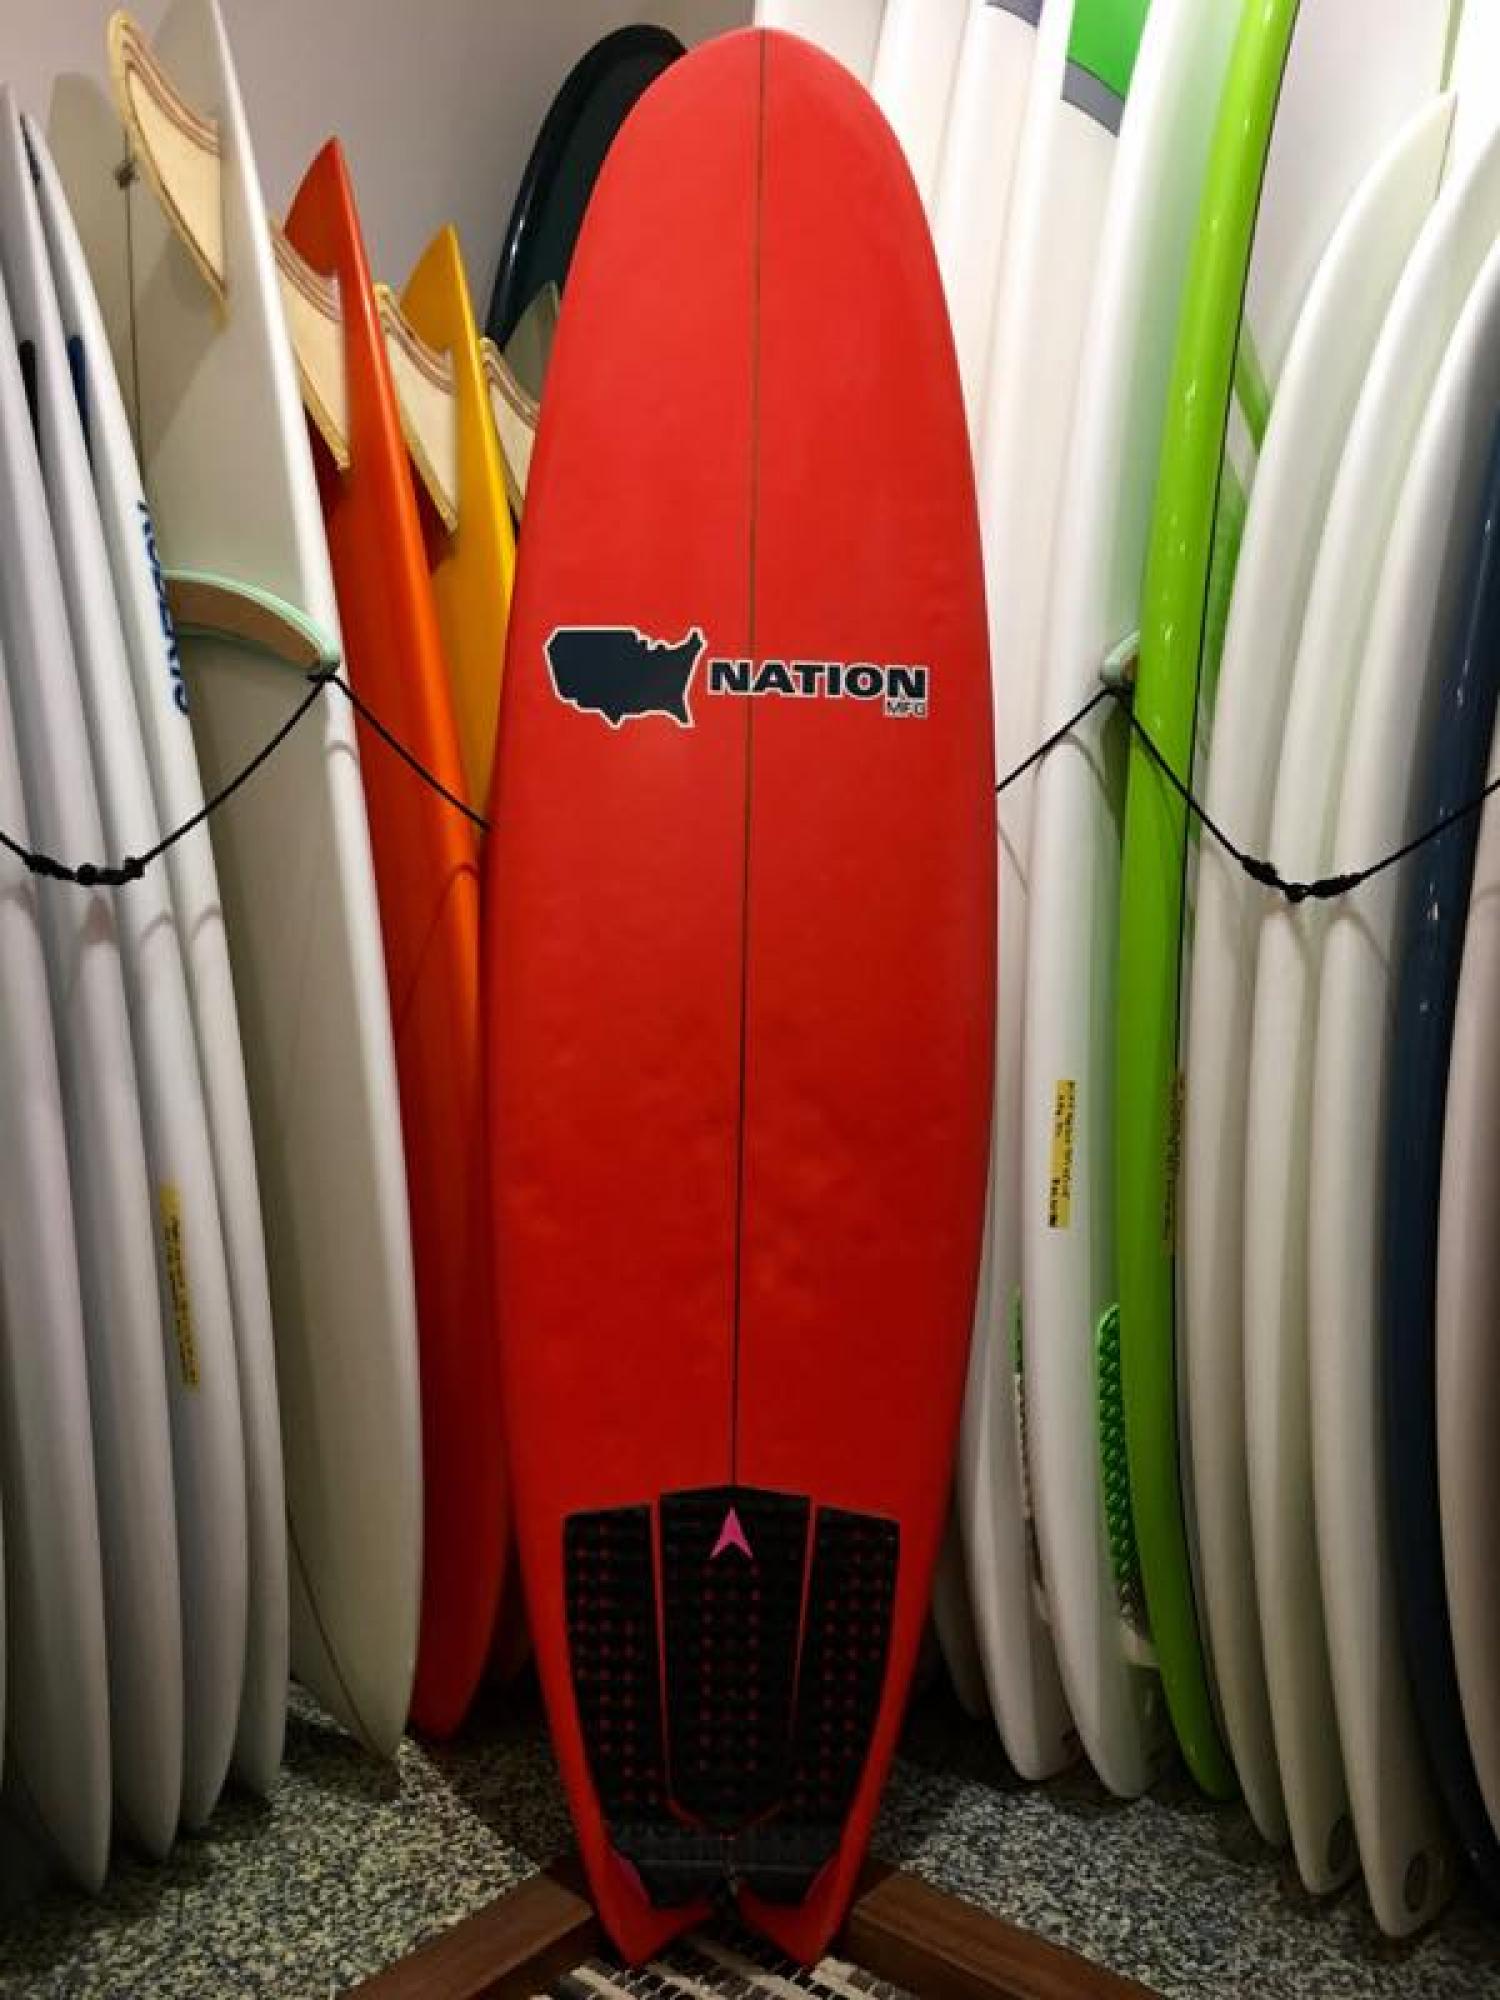 USED BOARD (NATION Galactic Laser 5.10 )